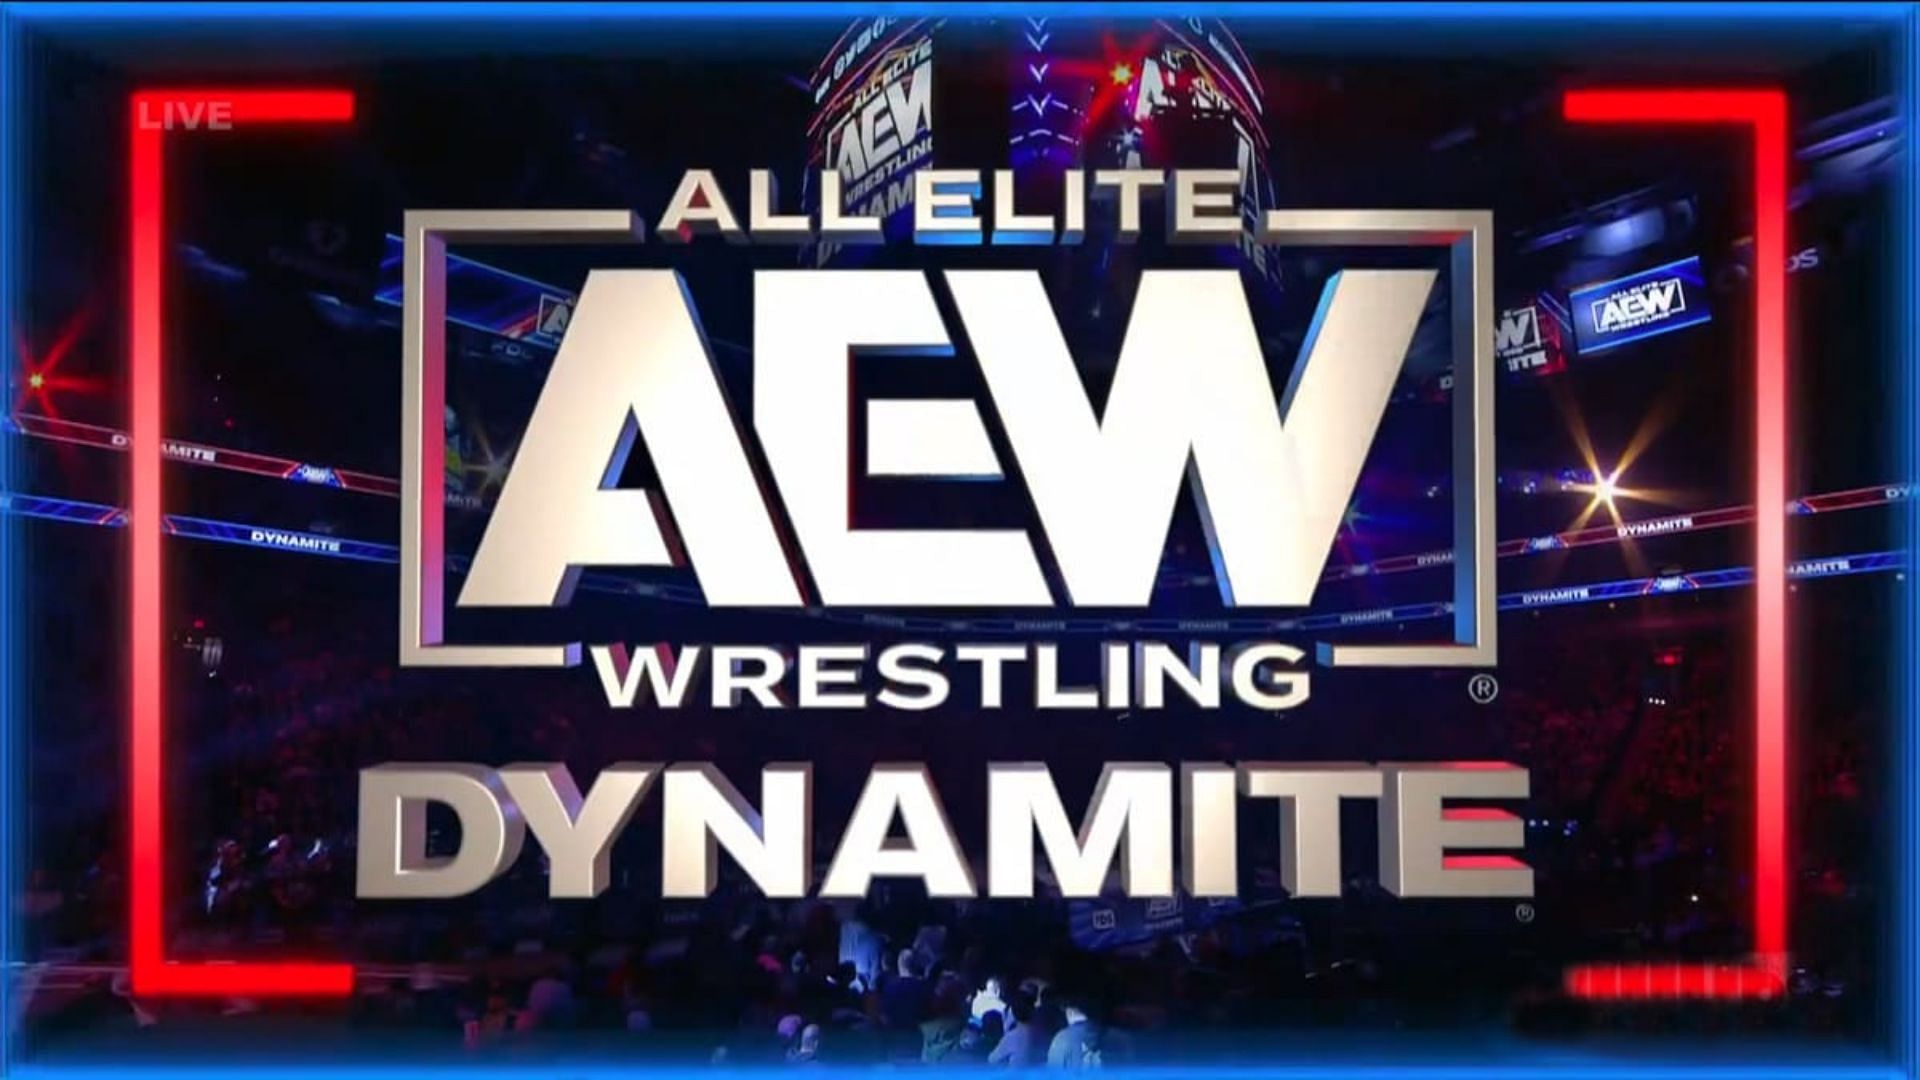 Find out which AEW star got a new name on Dynamite?